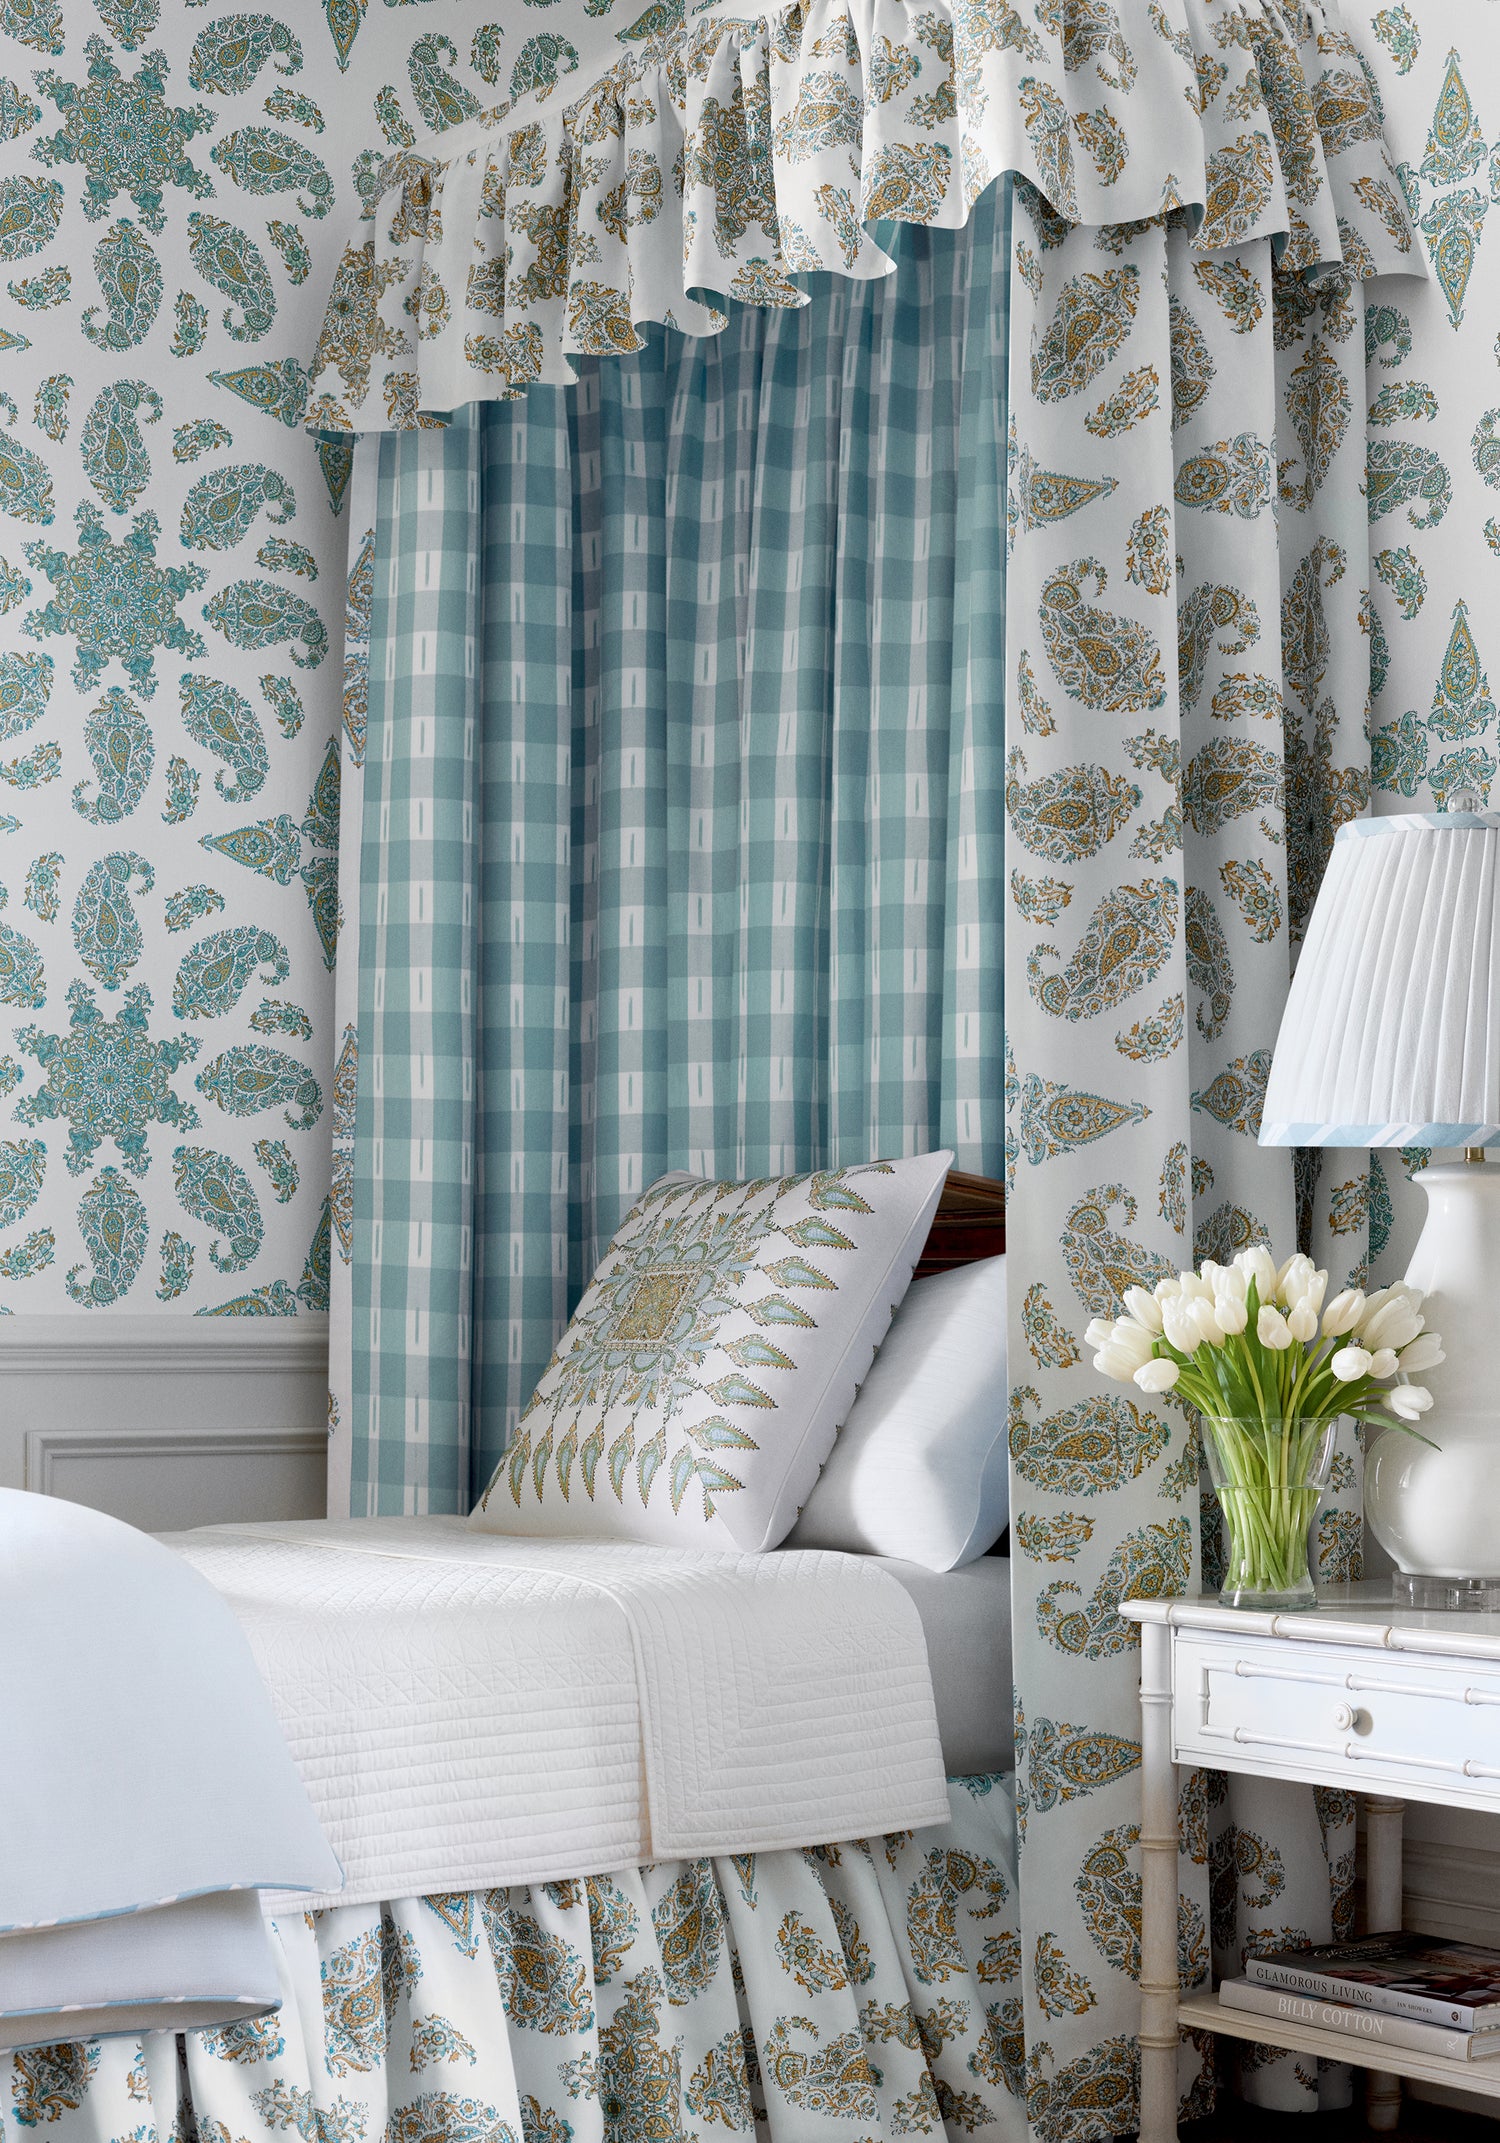 Detailed view of Bed canopy and skirt featuring East India fabric in seaglass color - pattern number F936428 - by Thibaut in the Indienne collection